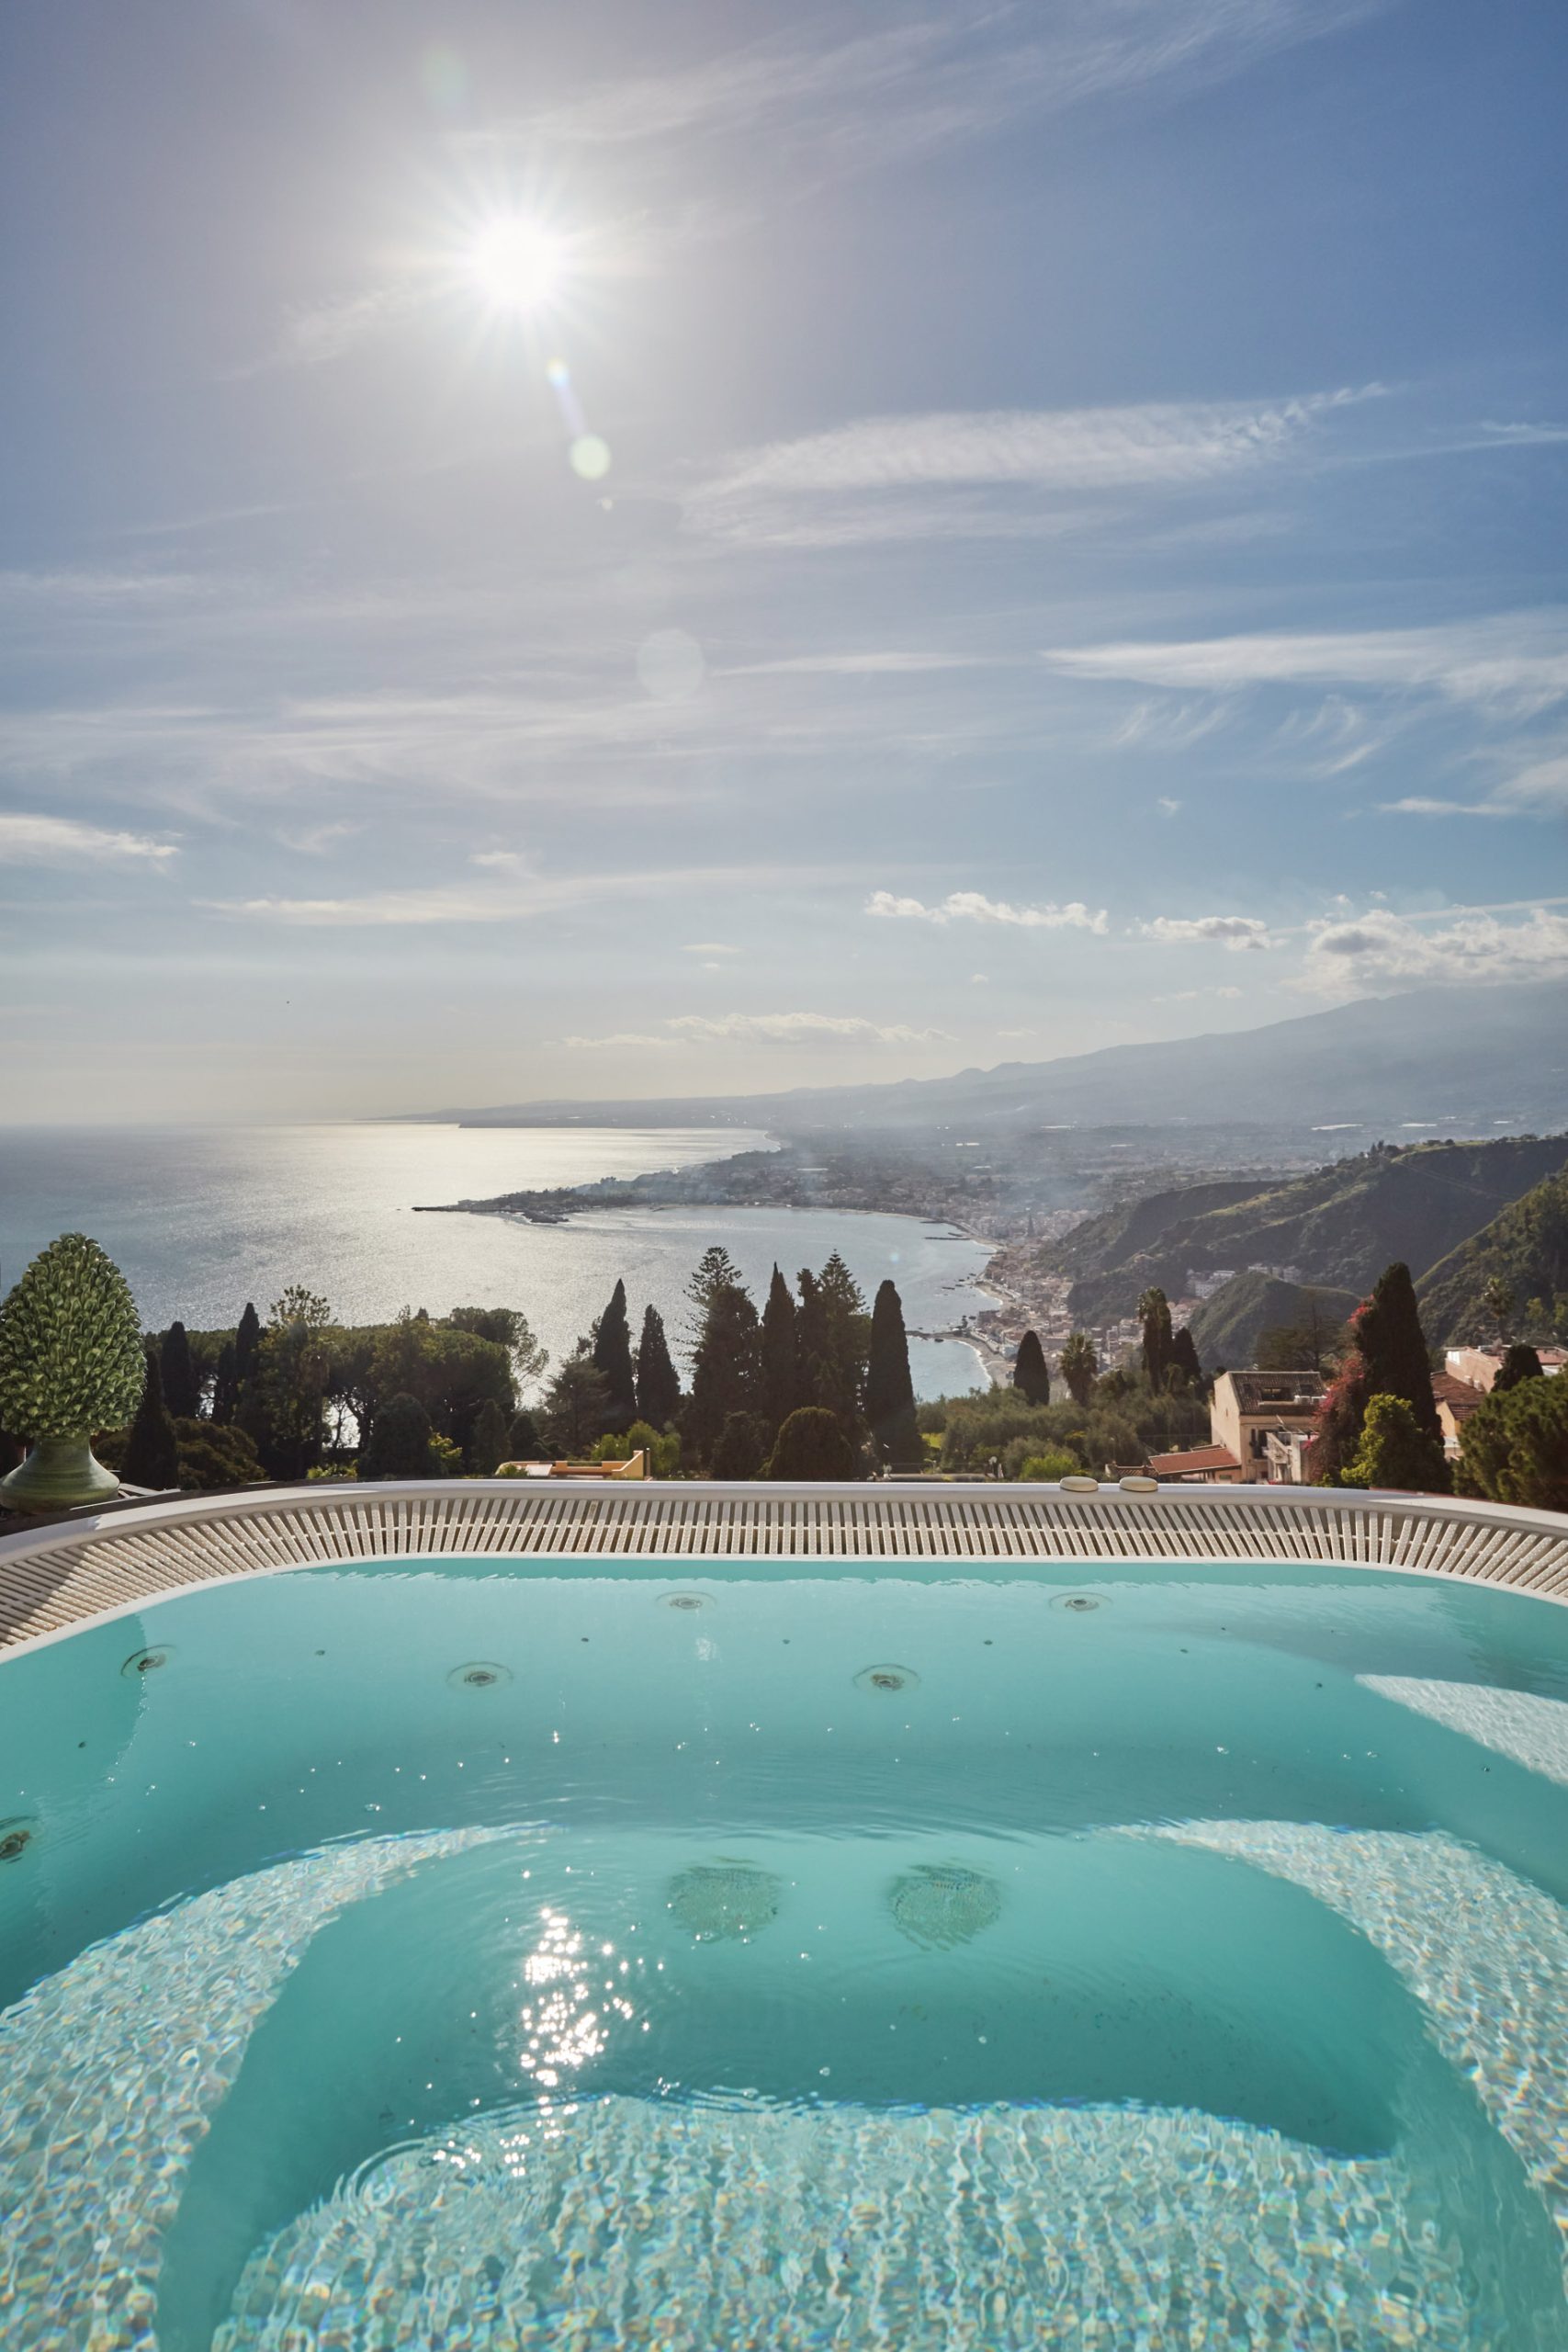 Grand Hotel Timeo, A Belmond Hotel – Taormina, Italy – Presidential Suite